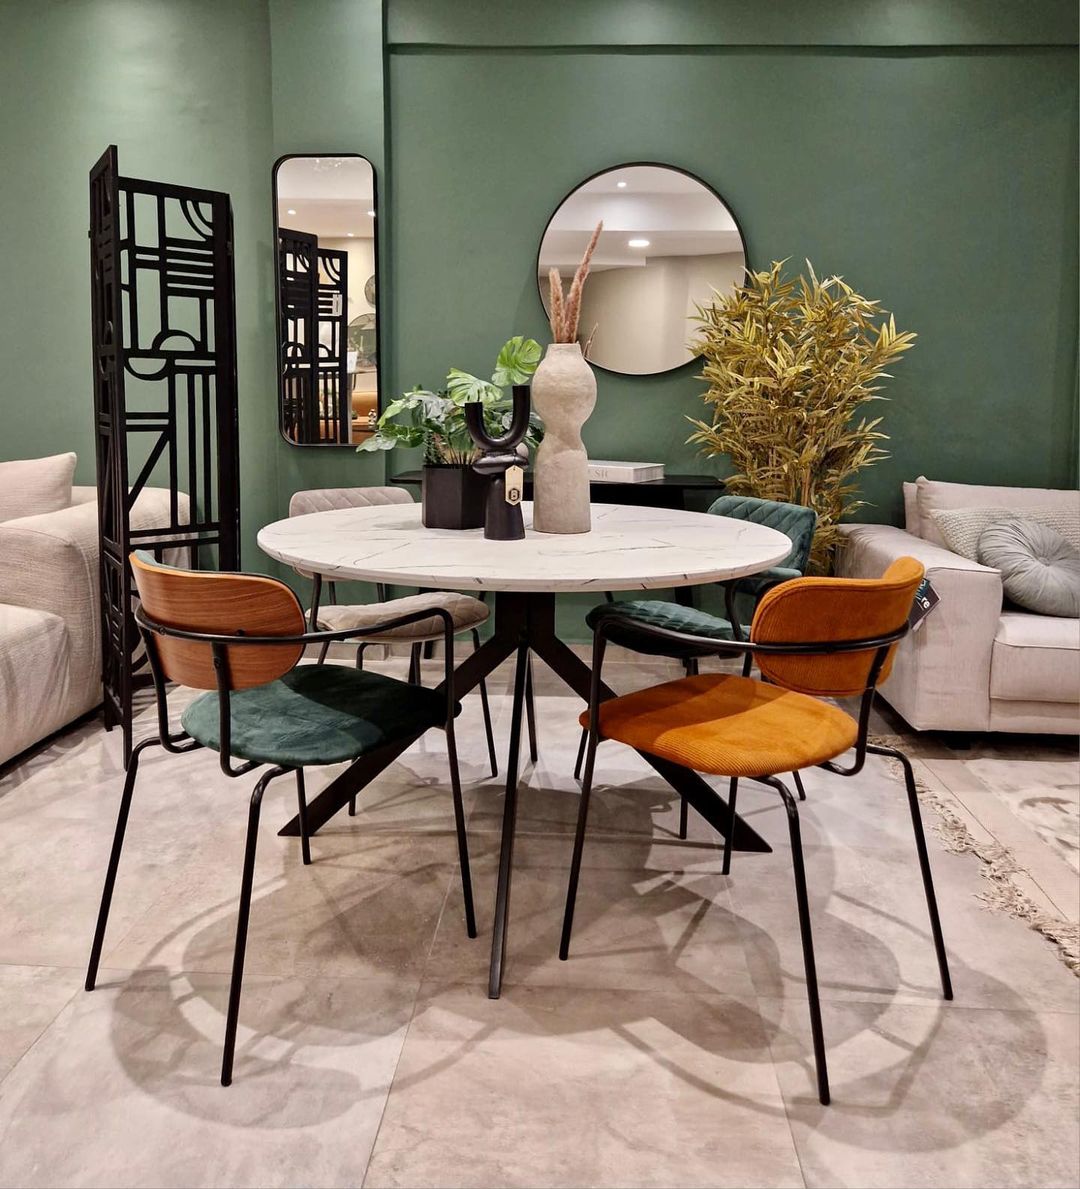 mid century modern dining area with green color scheme